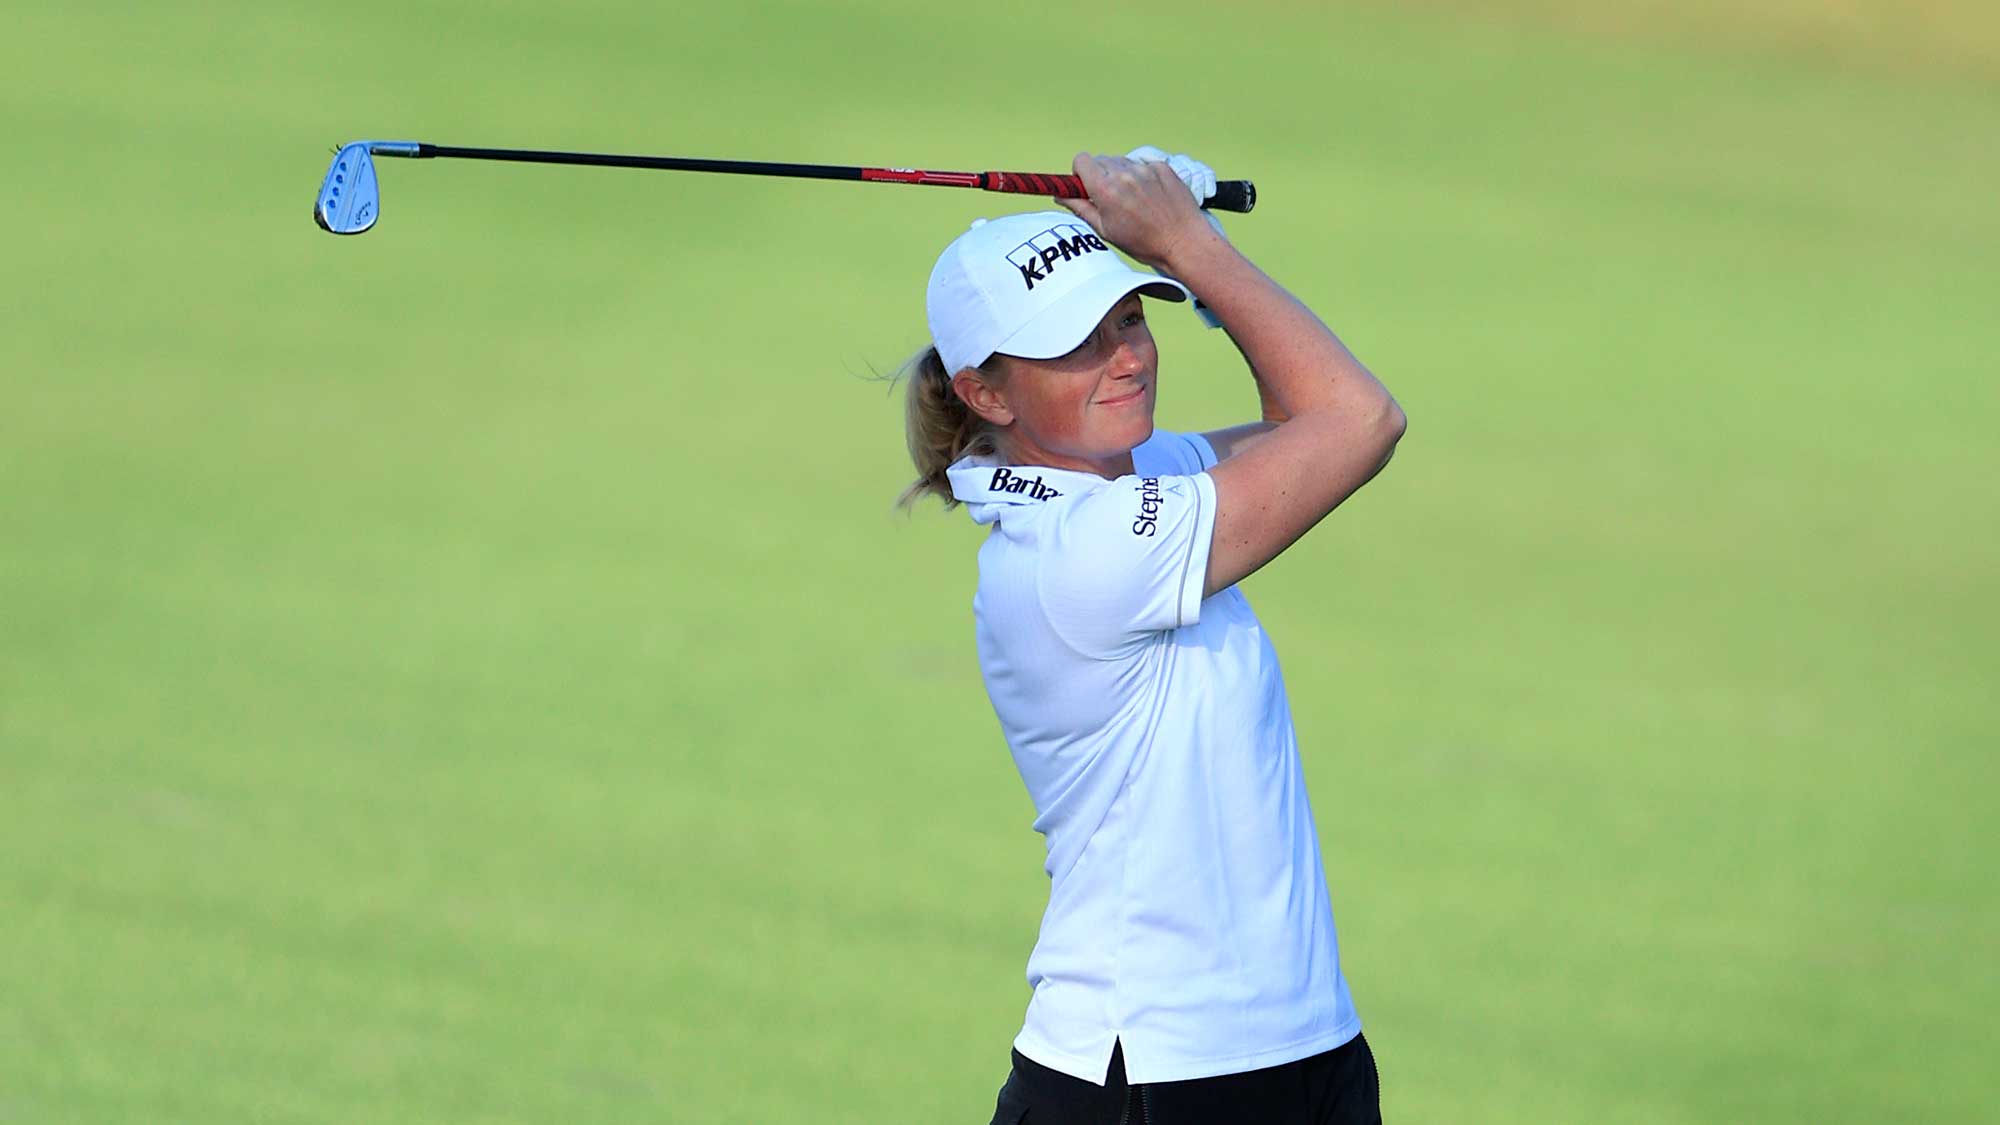 Stacy Lewis Makes Good on 2020 Promise to Young Daughter | LPGA ...